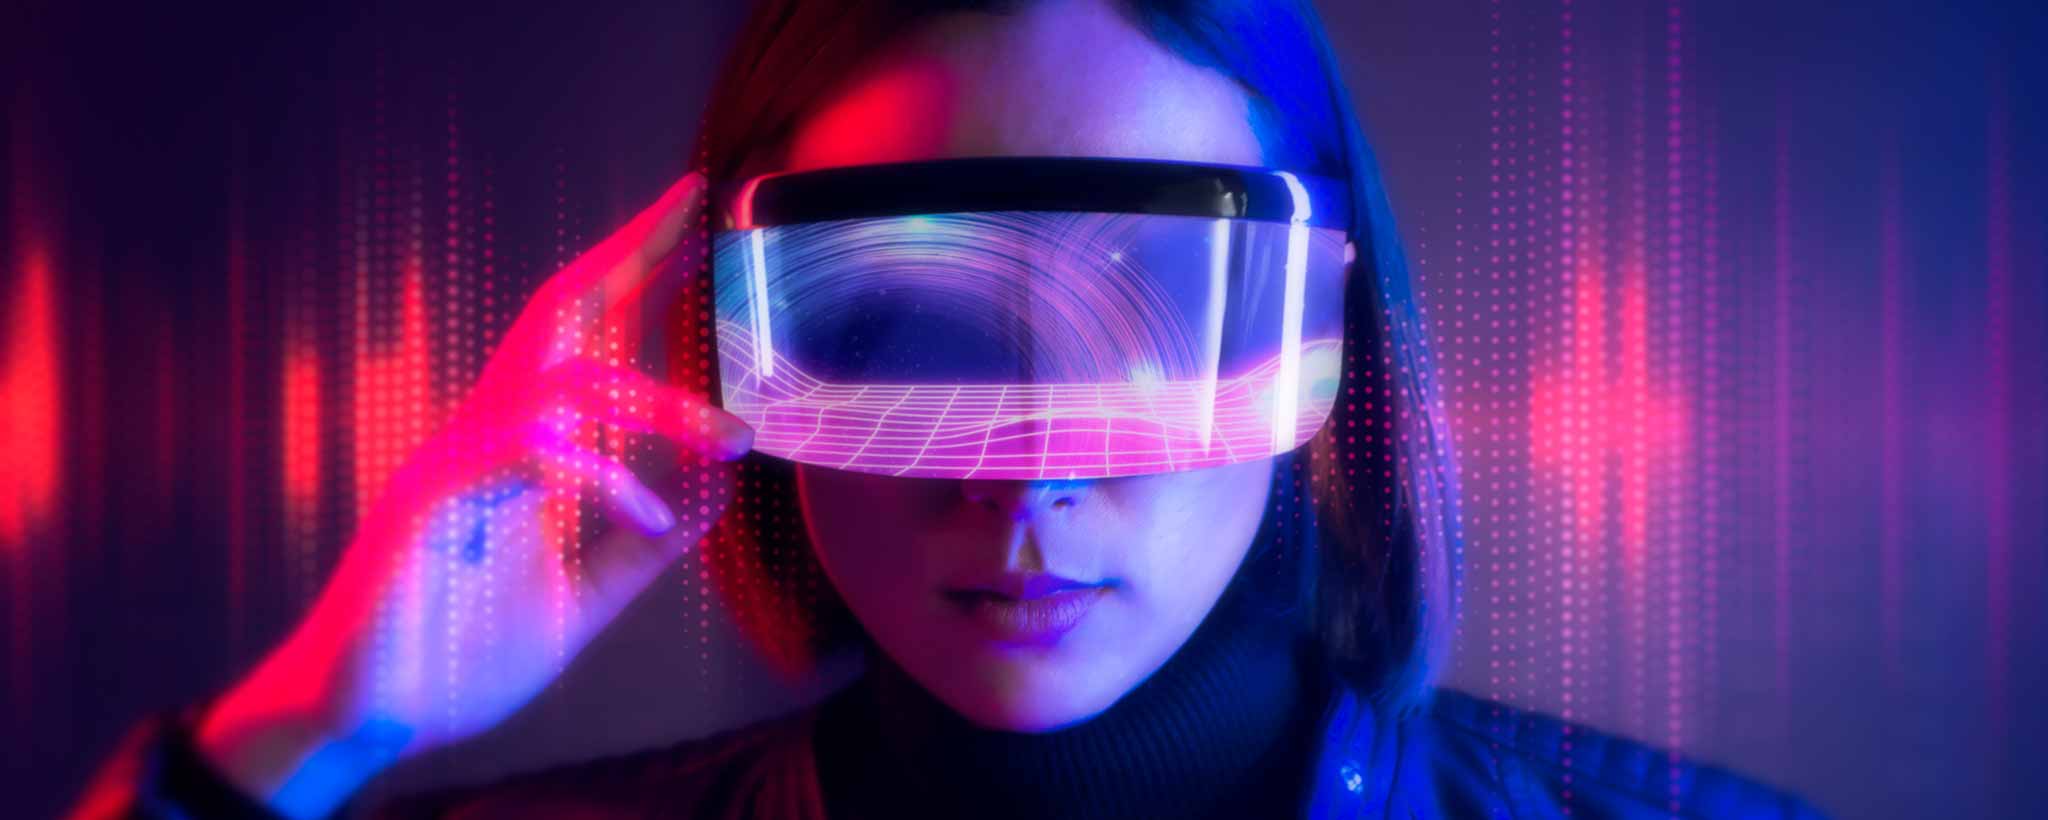 'Female wearing augmented reality glasses'